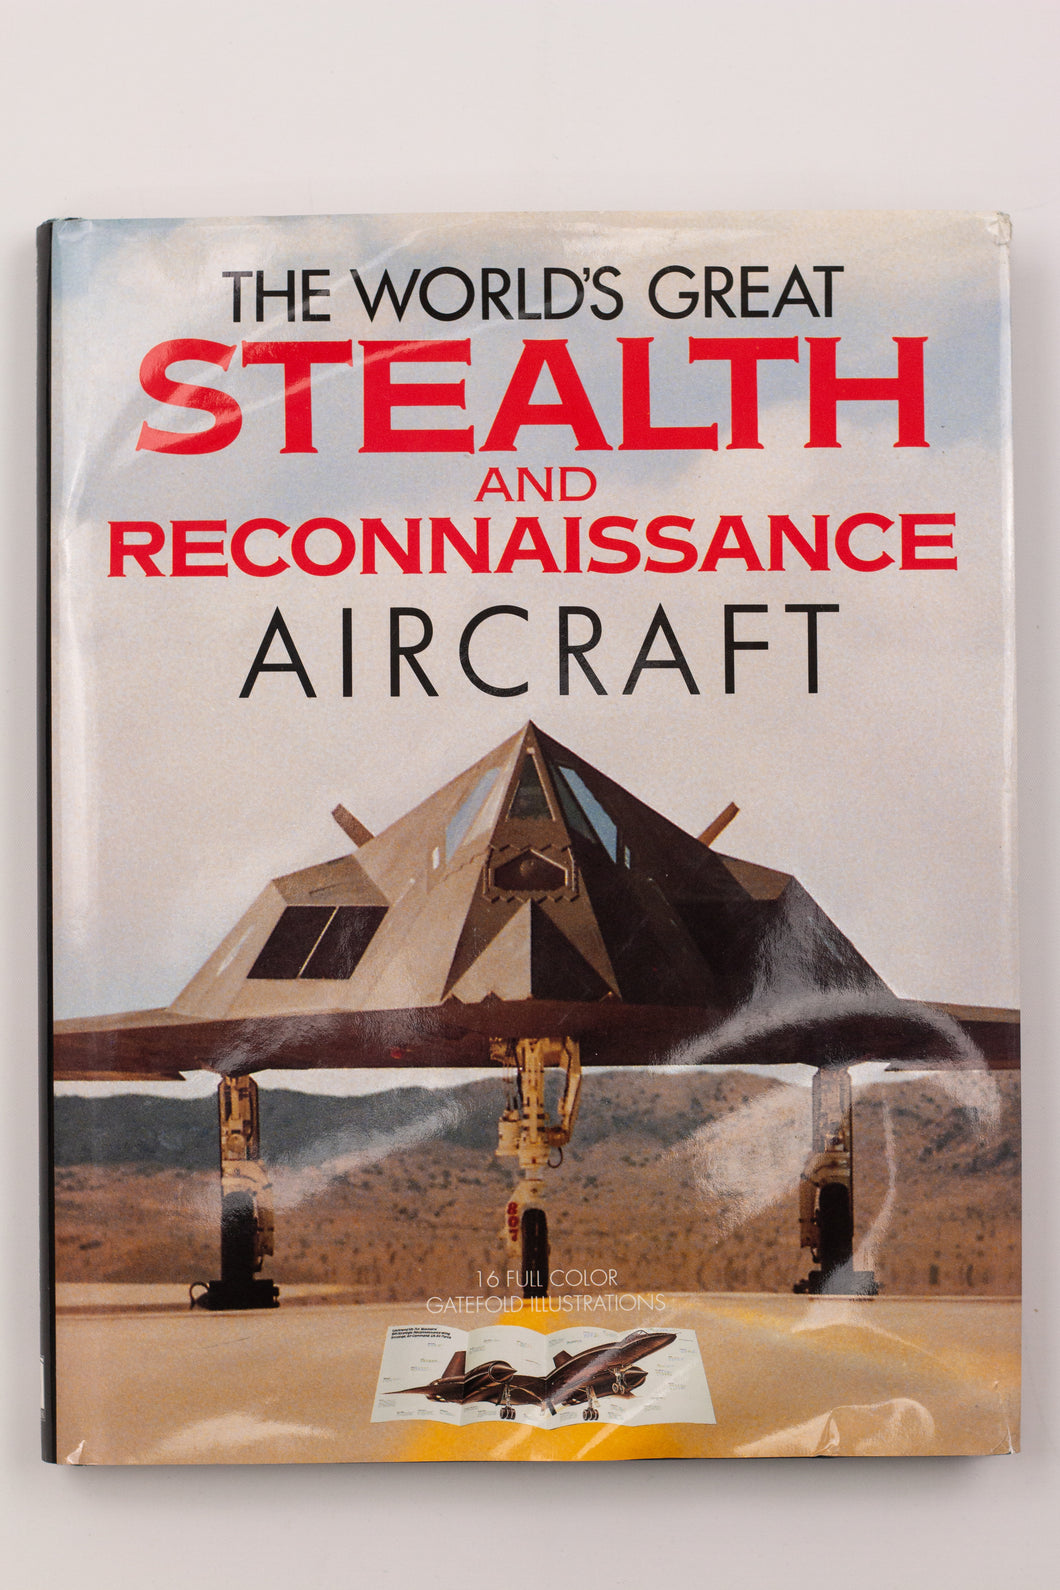 THE WORLD'S GREAT STEALTH AND RECONNAISSANCE AIRCRAFT BOOK